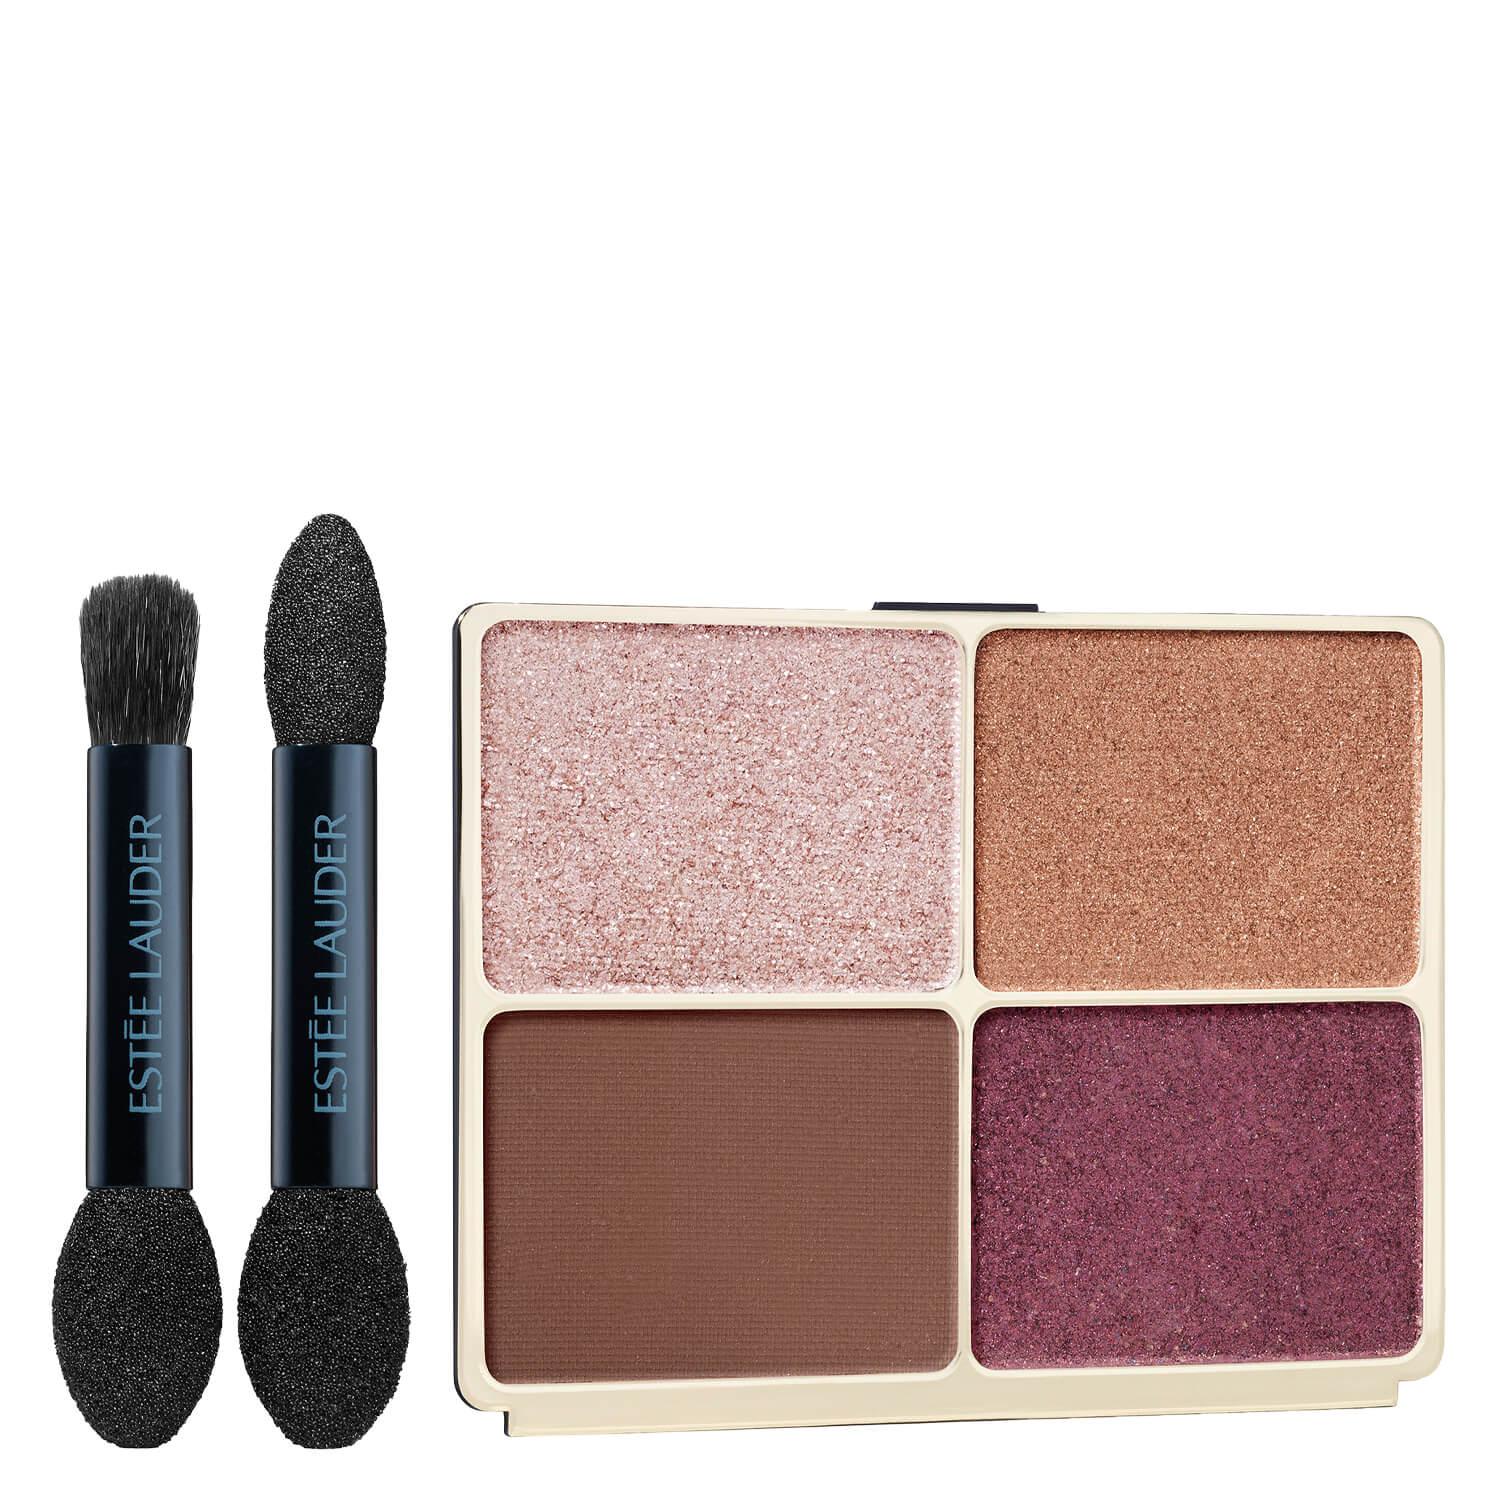 Pure Color Envy - Luxe EyeShadow Quad Rebel Patels 01 Refill